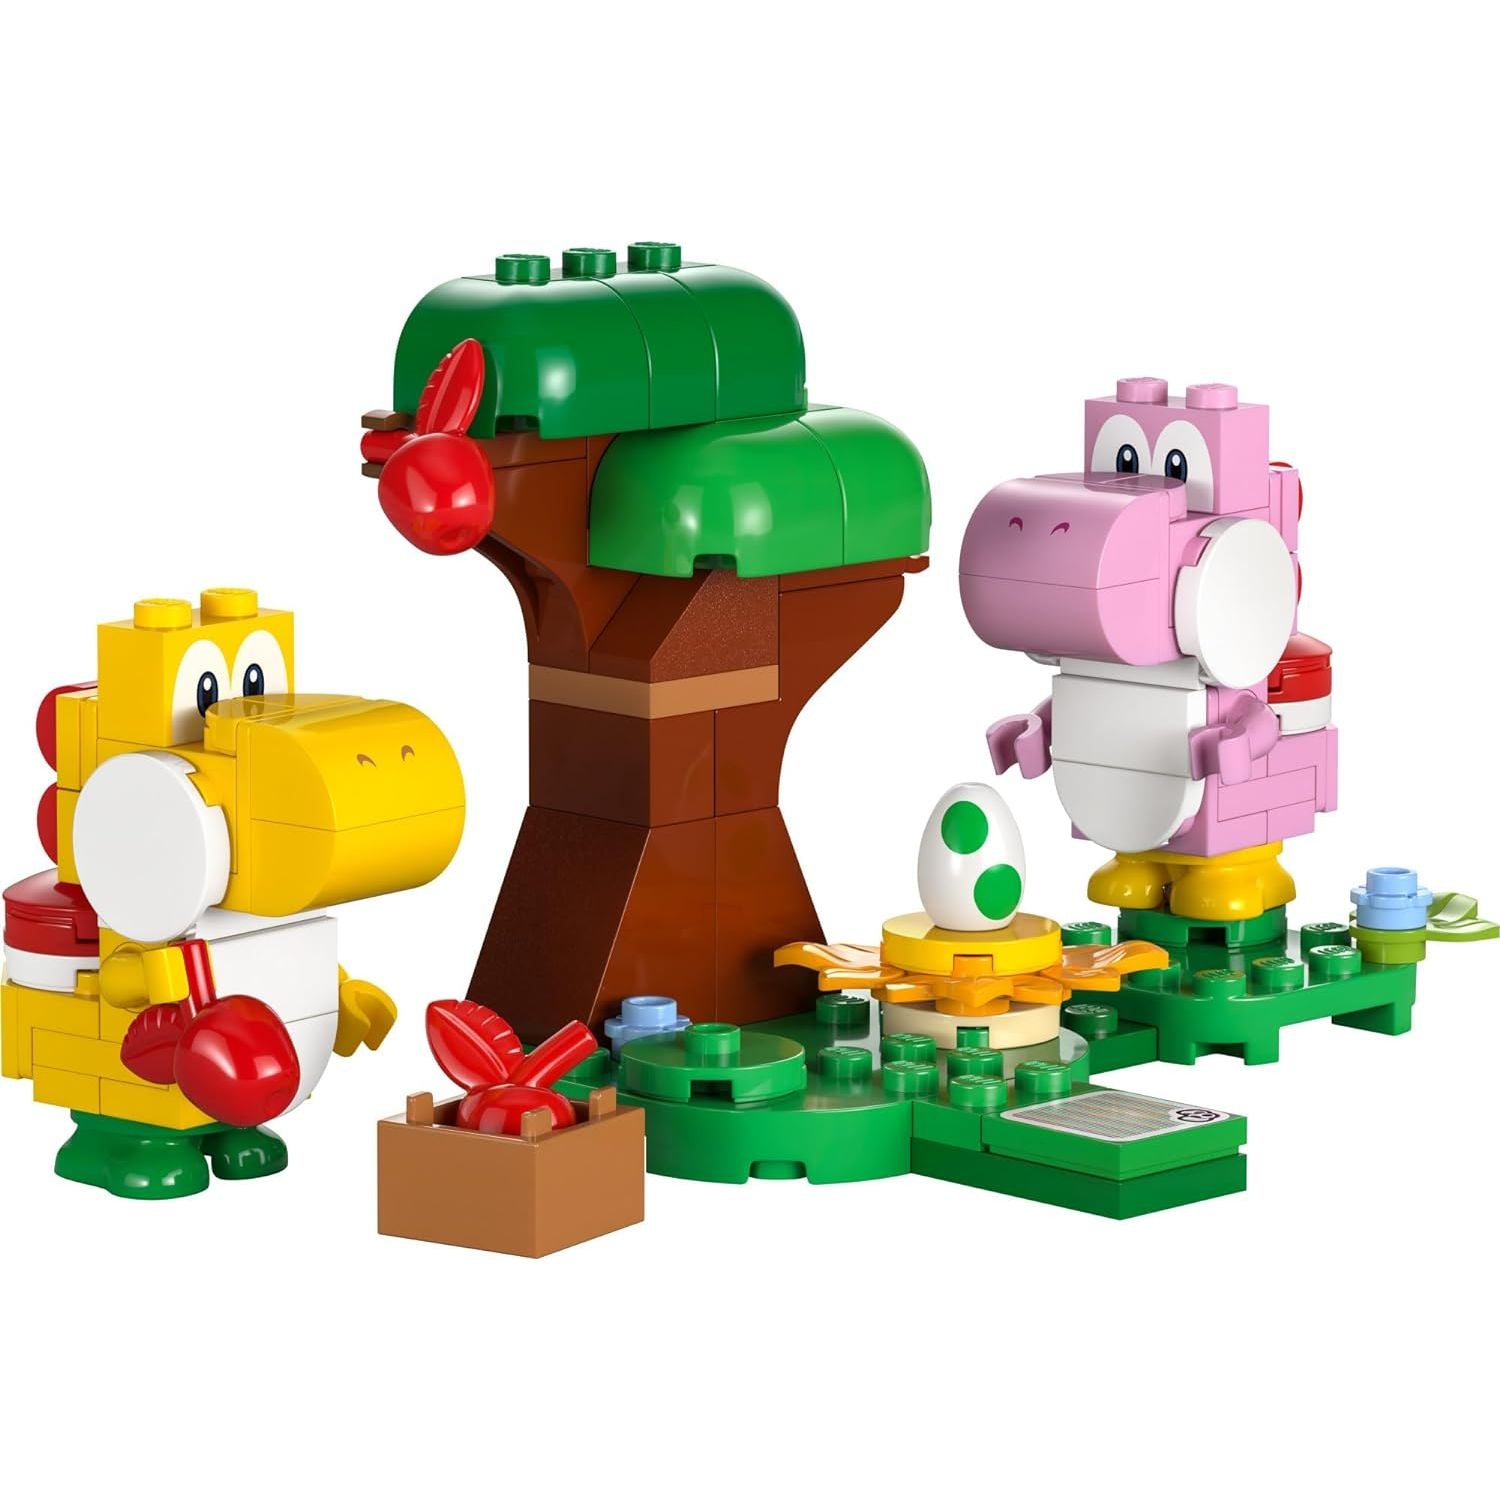 LEGO 71428 Super Mario Yoshis’ Egg-cellent Forest Expansion Set, Super Mario Collectible Toy for Kids, 2 Brick-Built Characters.